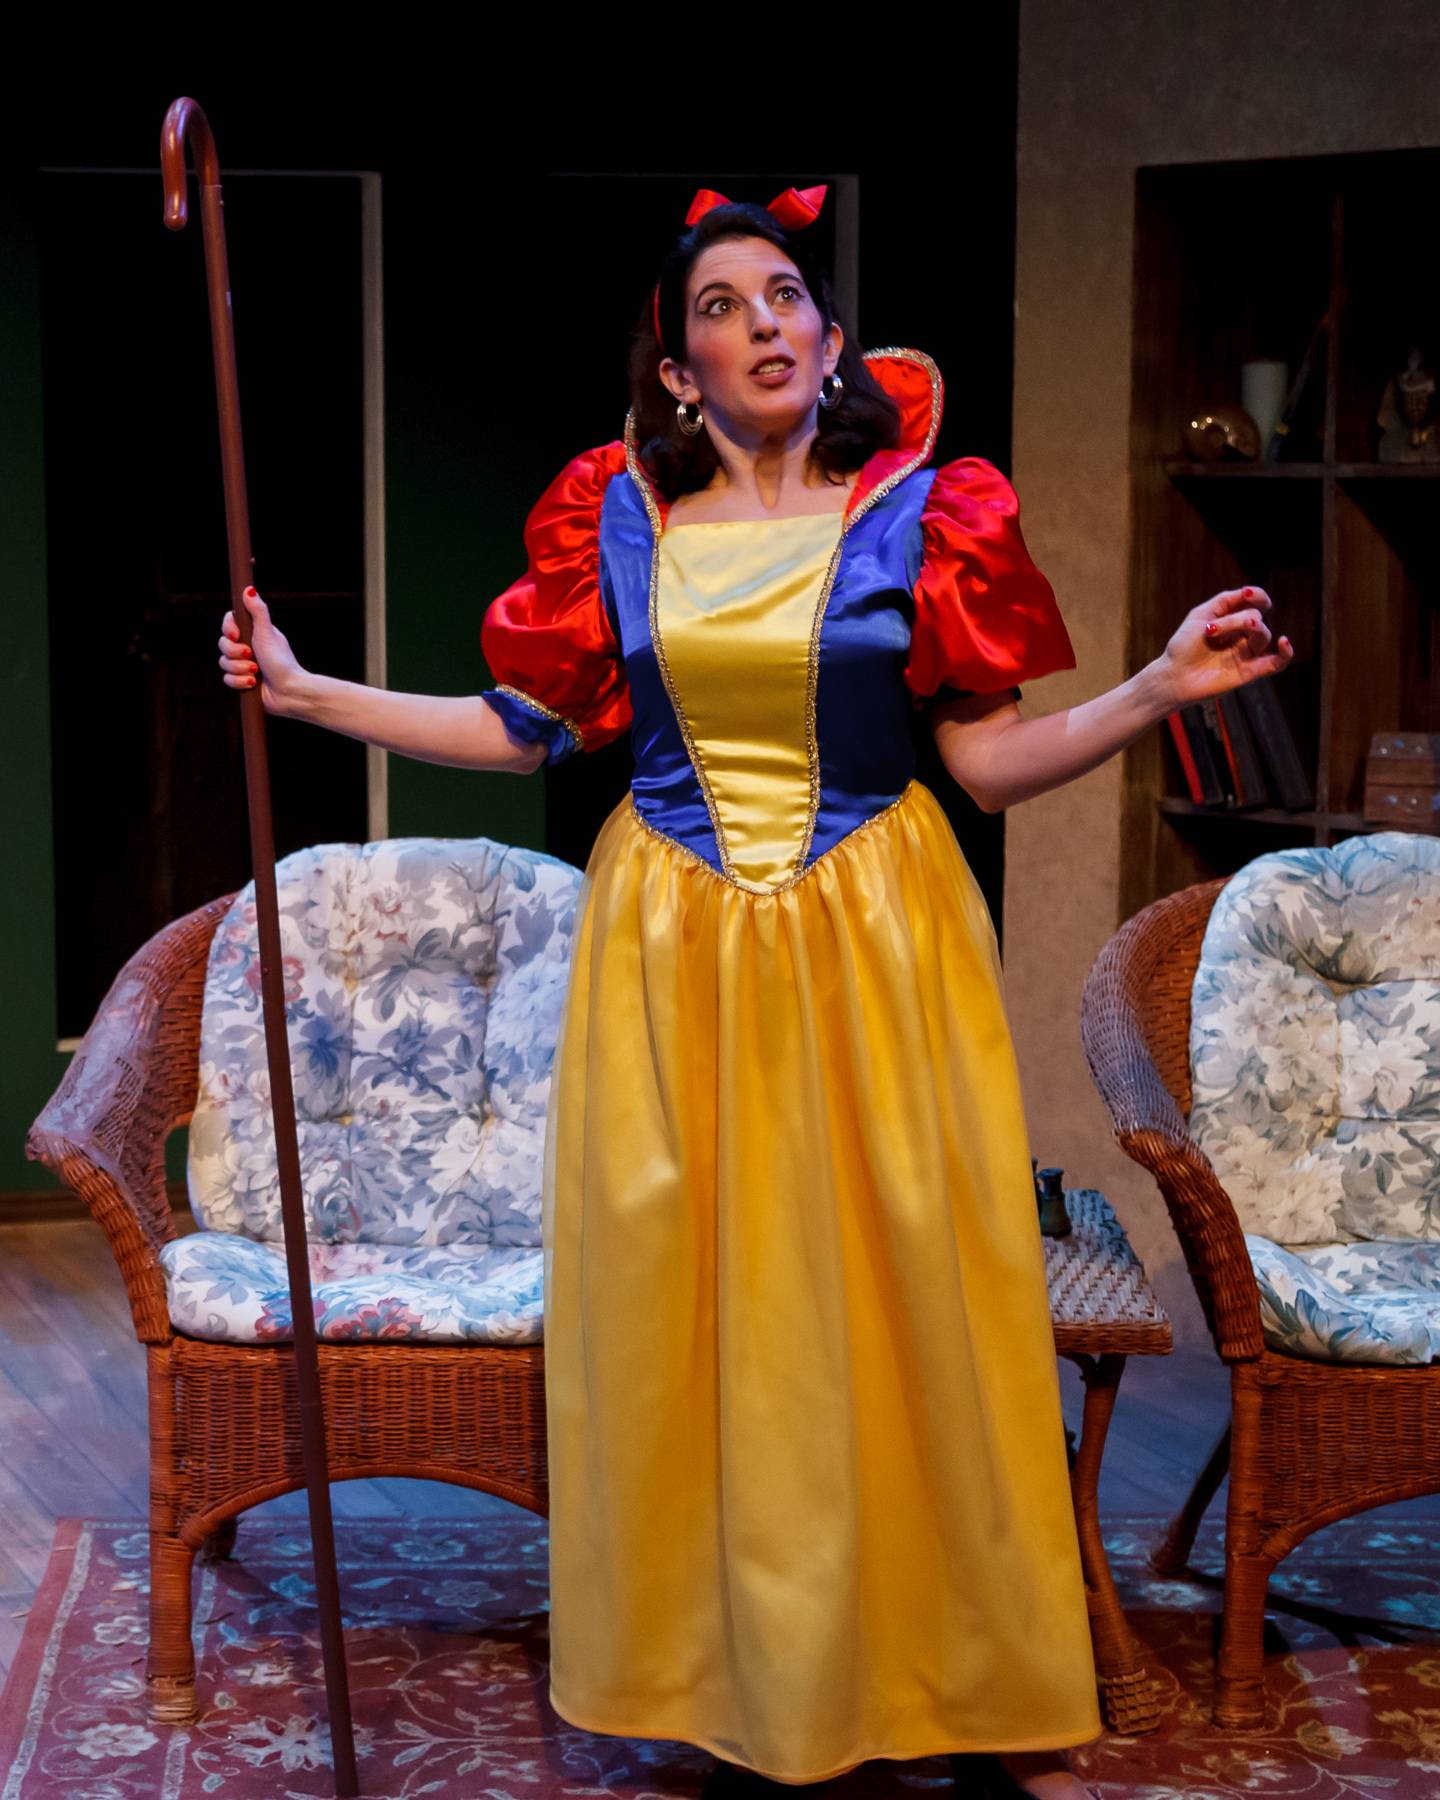 Image: Photo of Jaclyn Loewenstein dressed as Snow White in a scene from Vanya and Sonia and Masha and Spike. Photo by Jesse Folks.